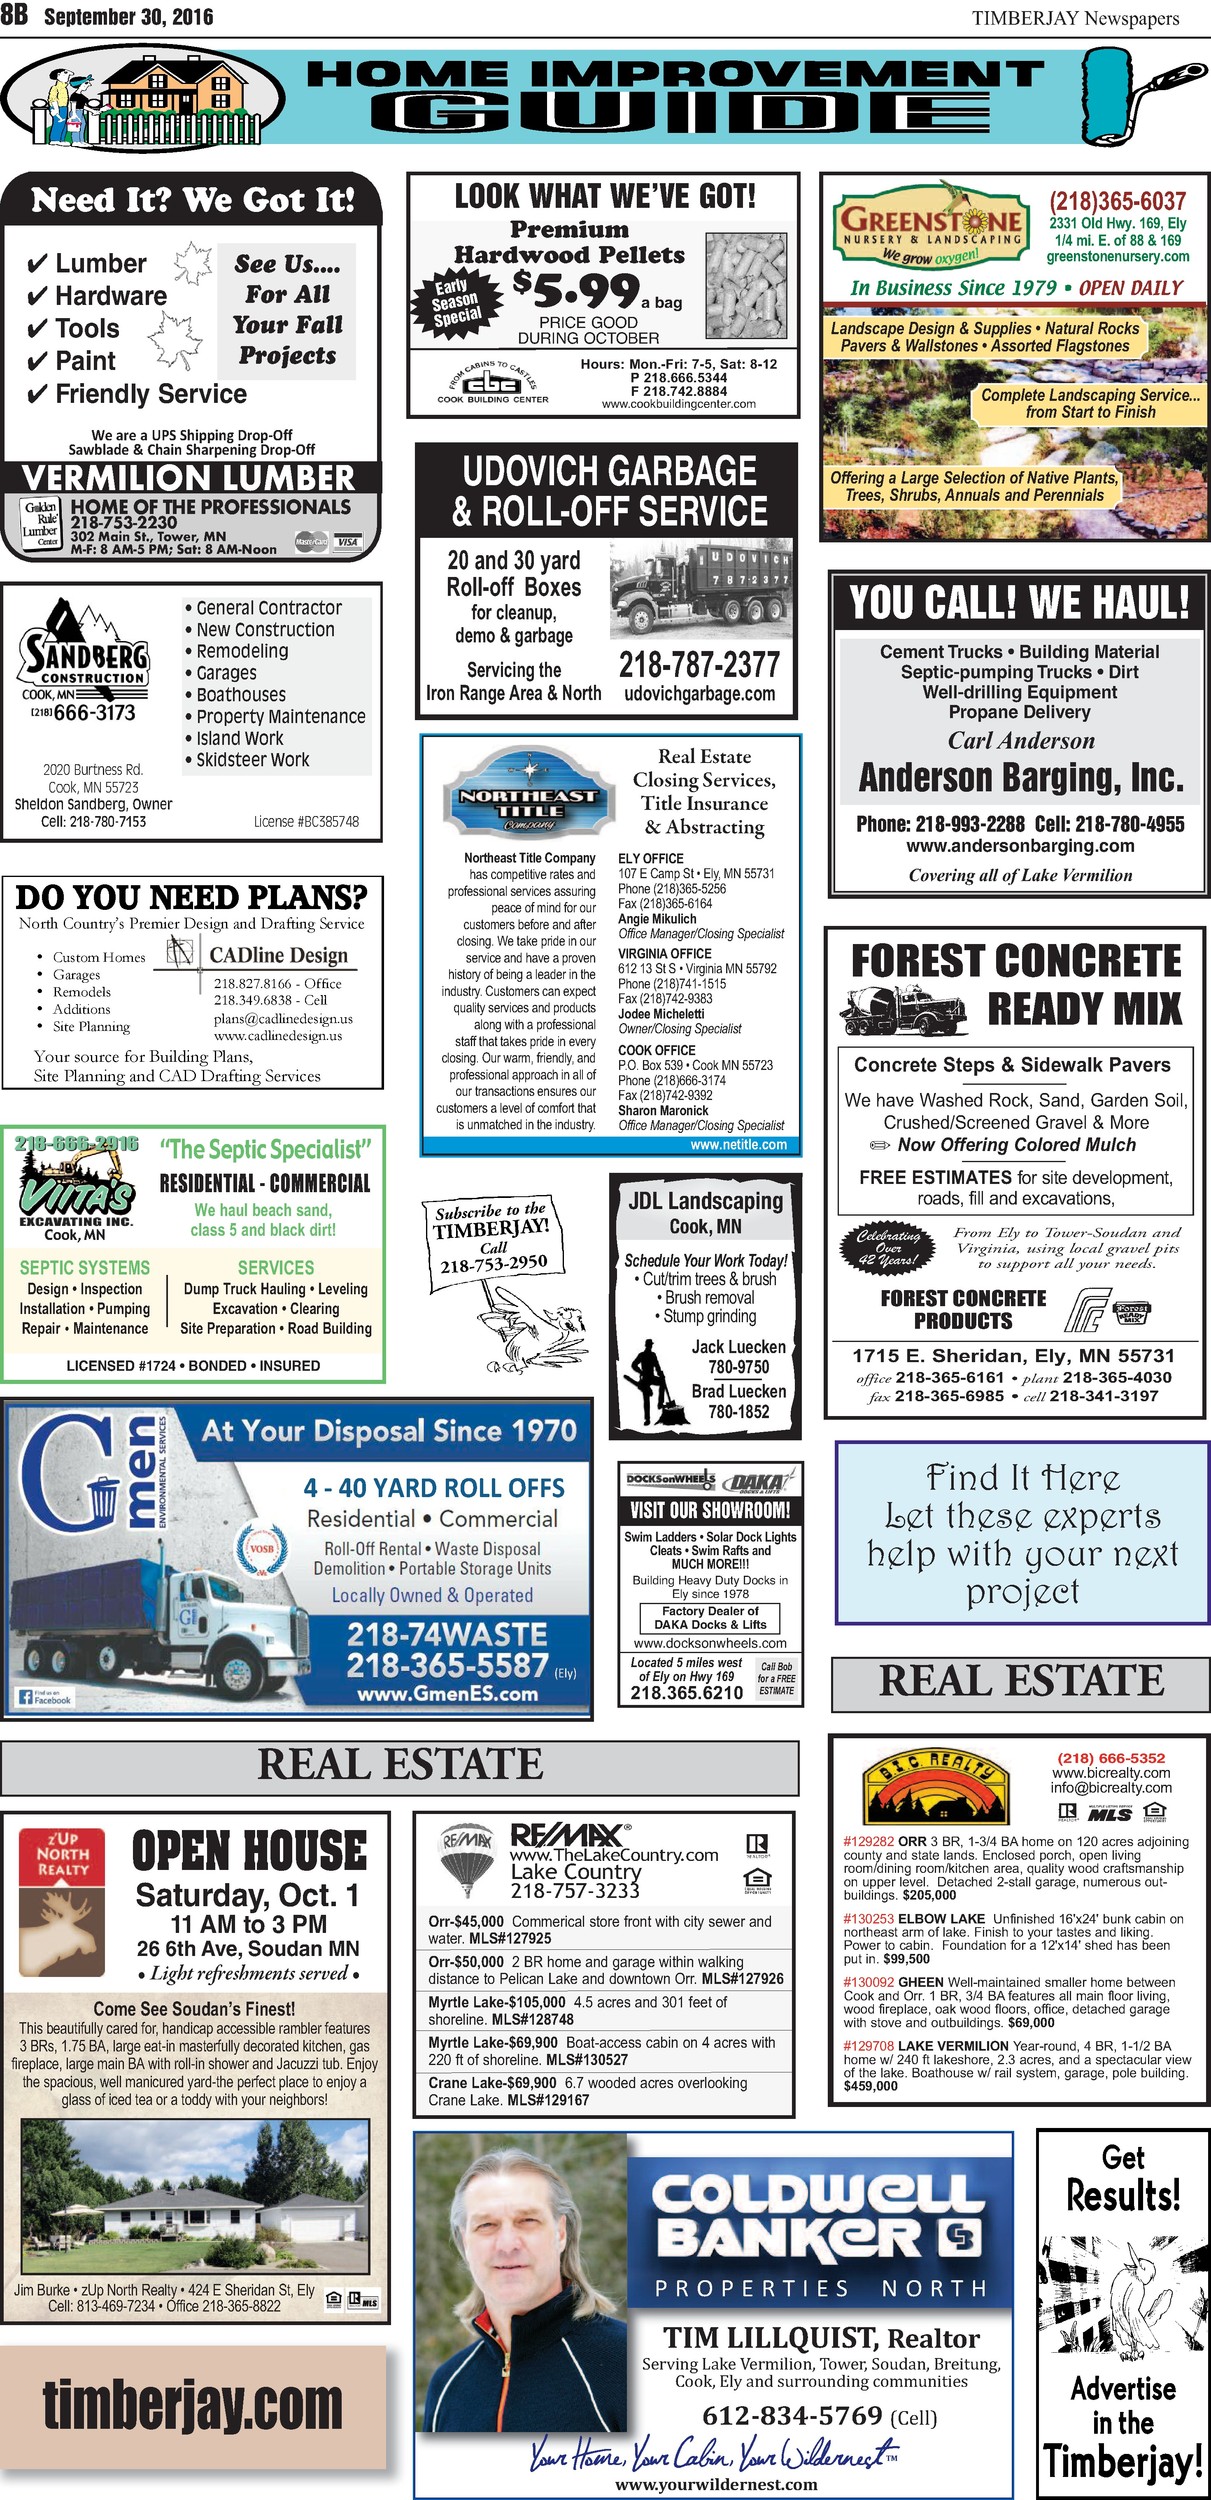 Click here to read the legal notices and classifieds on page B8